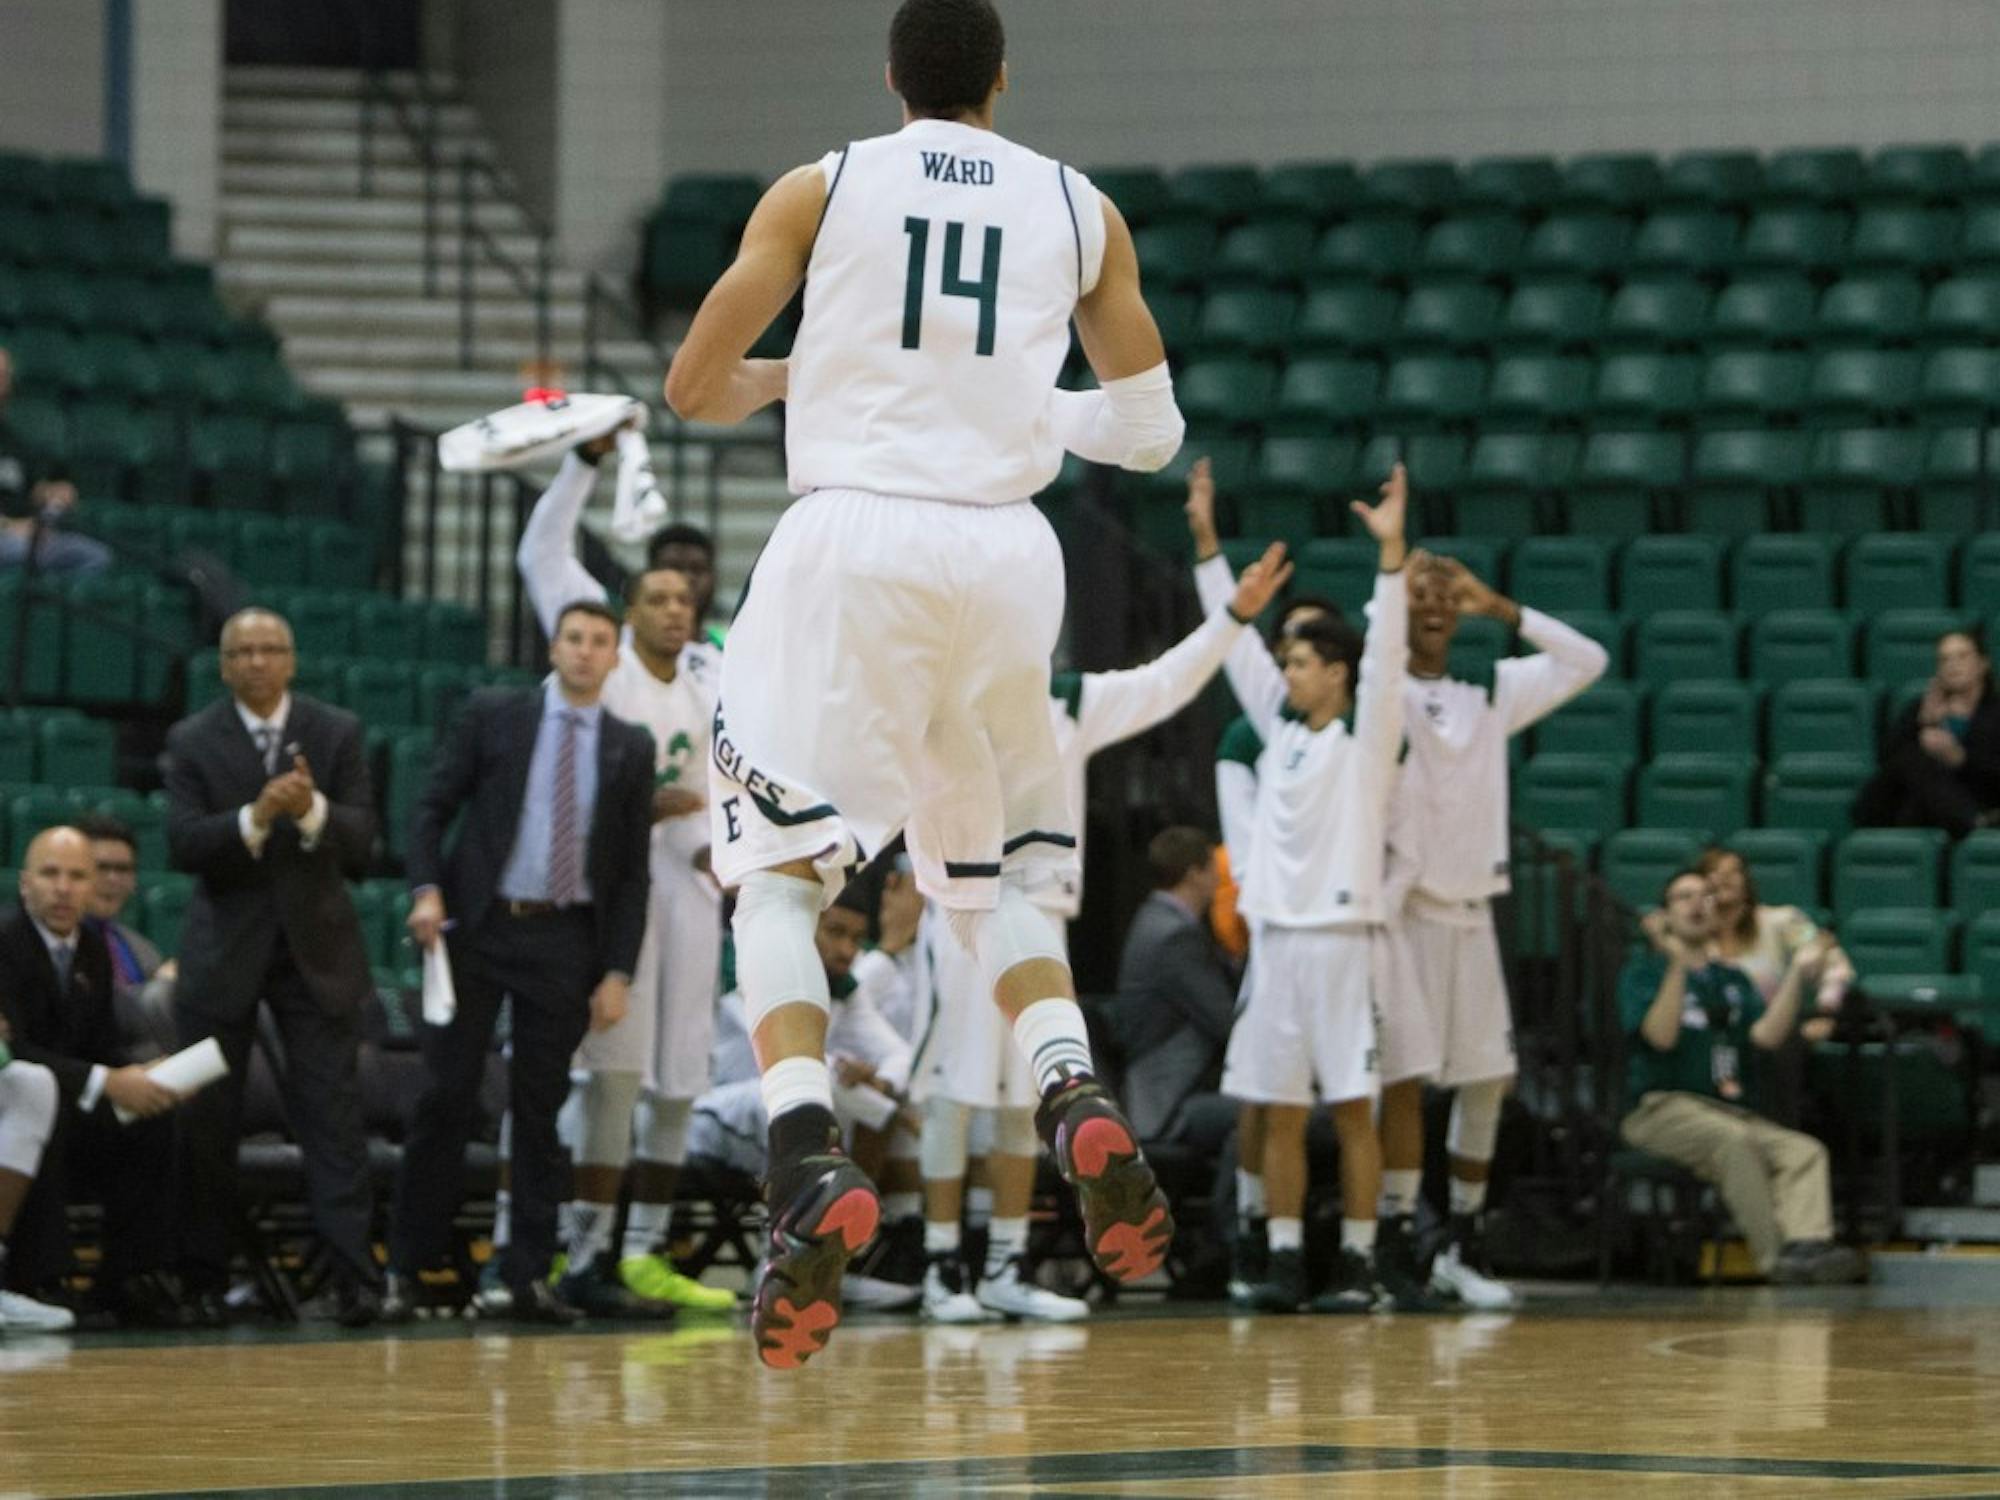 Eastern Michigan forward Karrington Ward scored 22 points and pulled in 10 rebounds in the Eagles 83-69 win over Miami (OH) Feb. 10 2015 at the Convocation Center.